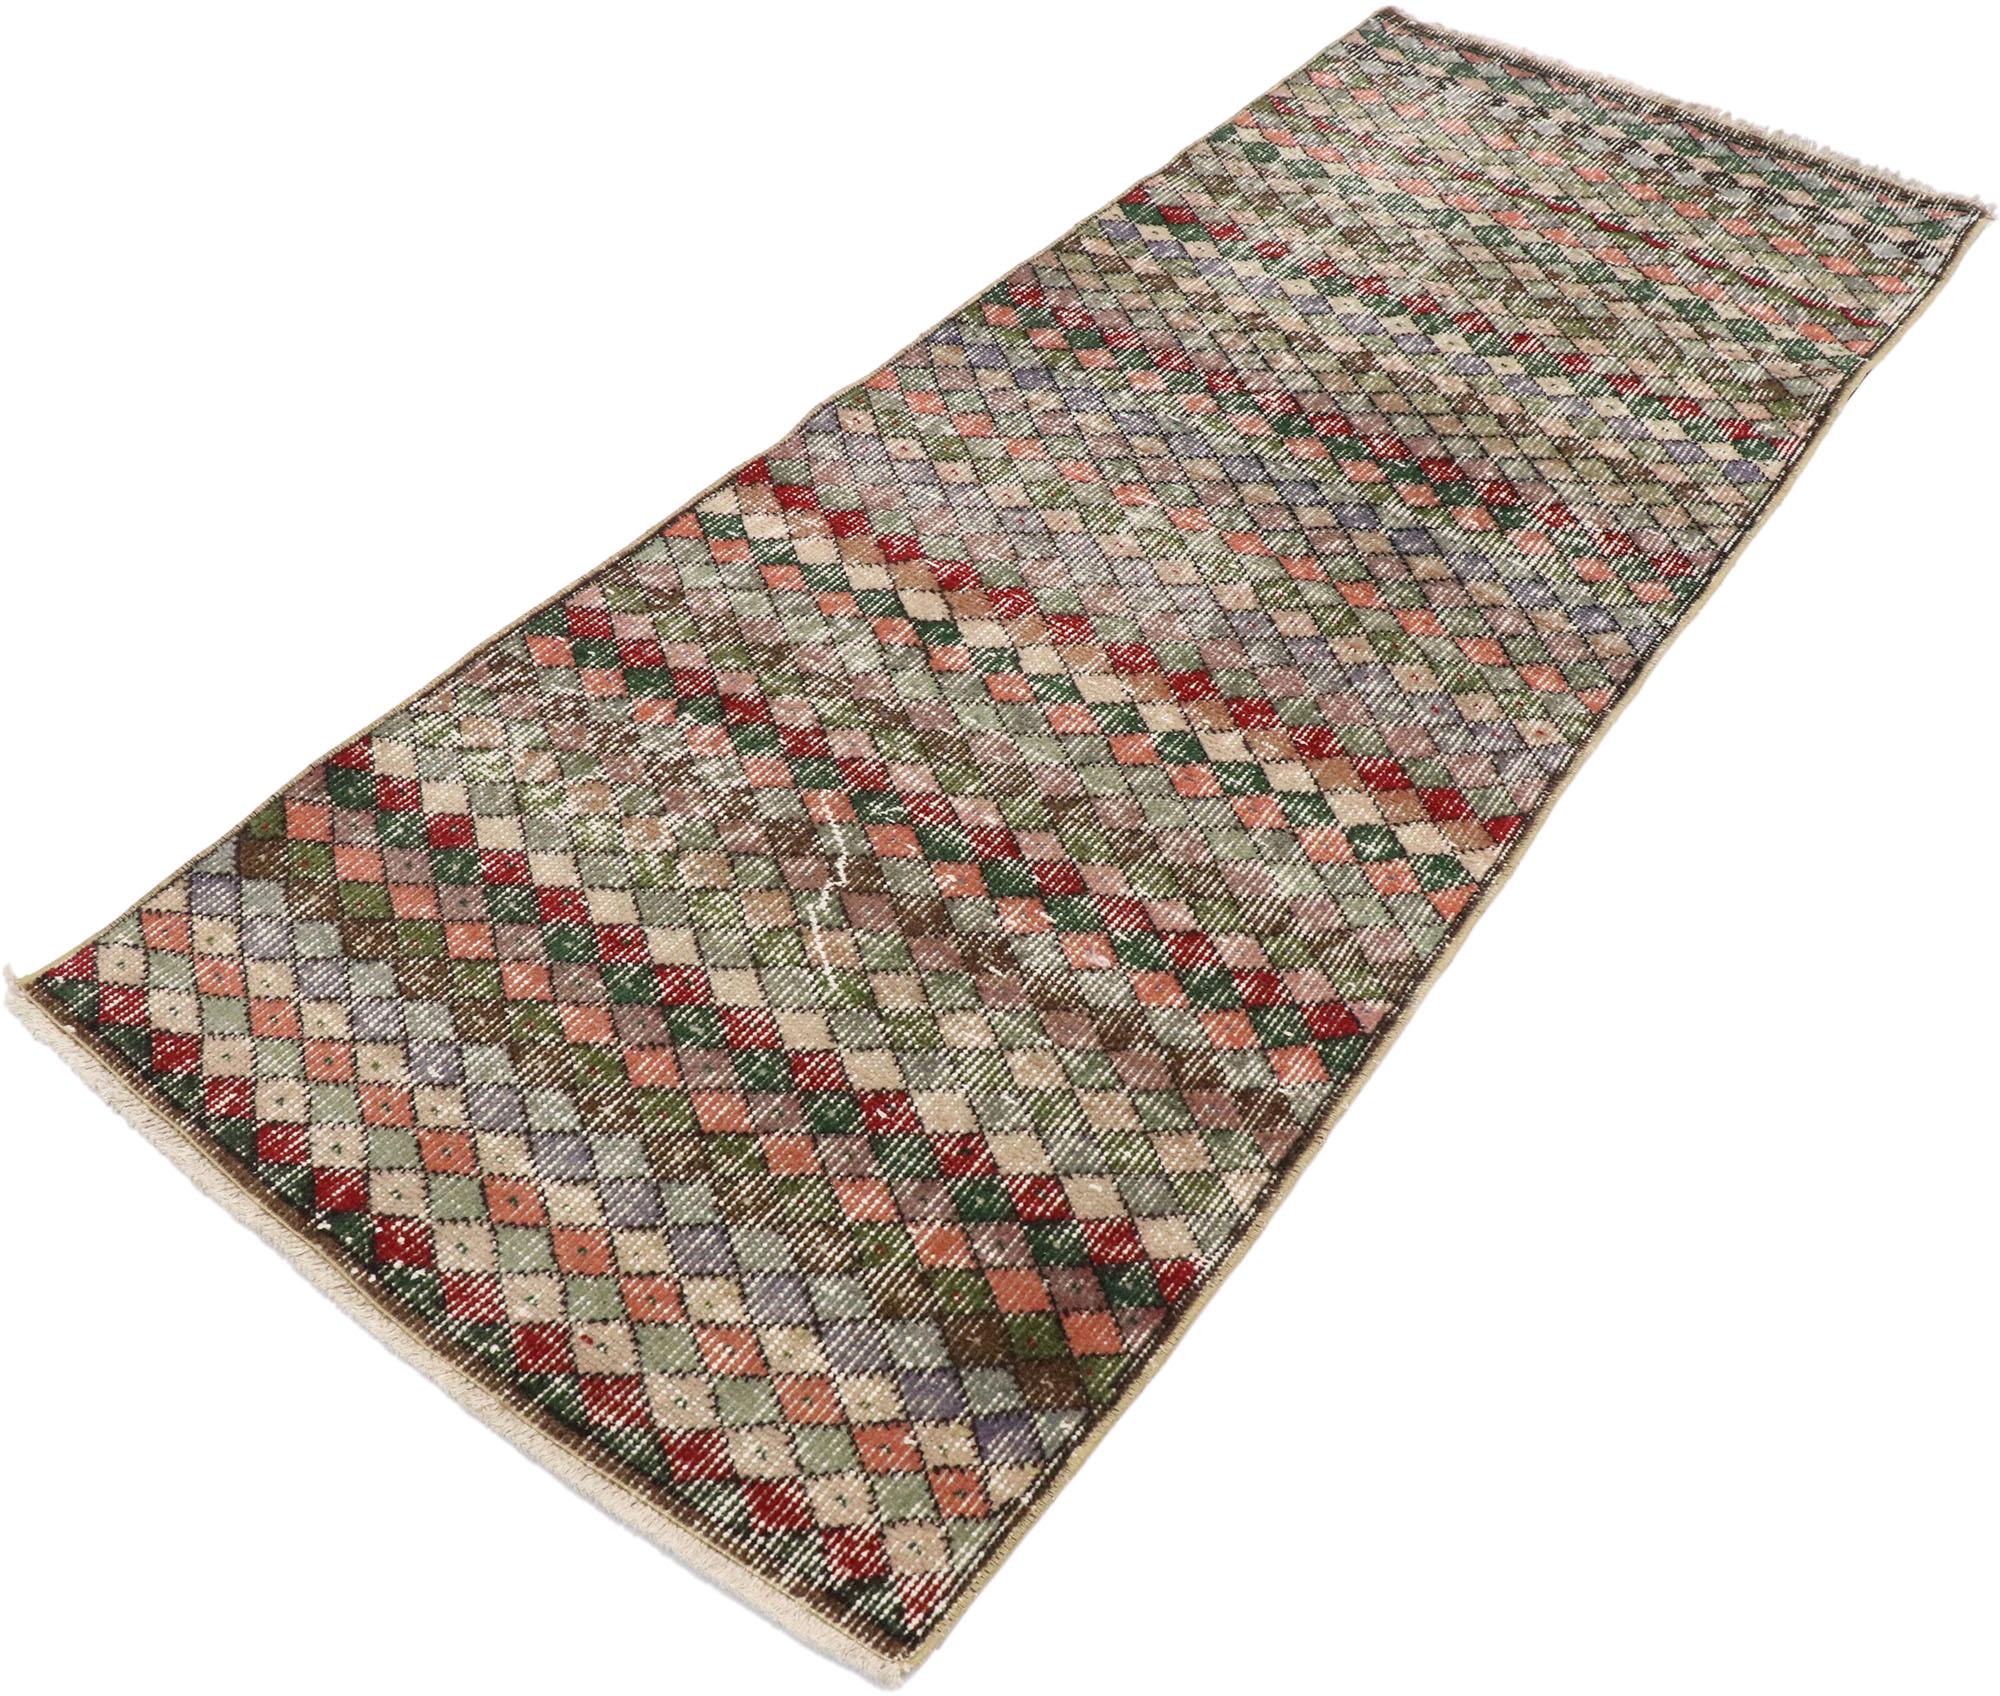 53374 Distressed Vintage Turkish Sivas Rug with Rustic Mid-Century Modern Style 02'03 x 05'09. This hand-knotted wool distressed vintage Turkish Sivas rug features an all-over geometric pattern comprised of multi-colored diamonds. Gentle waves of